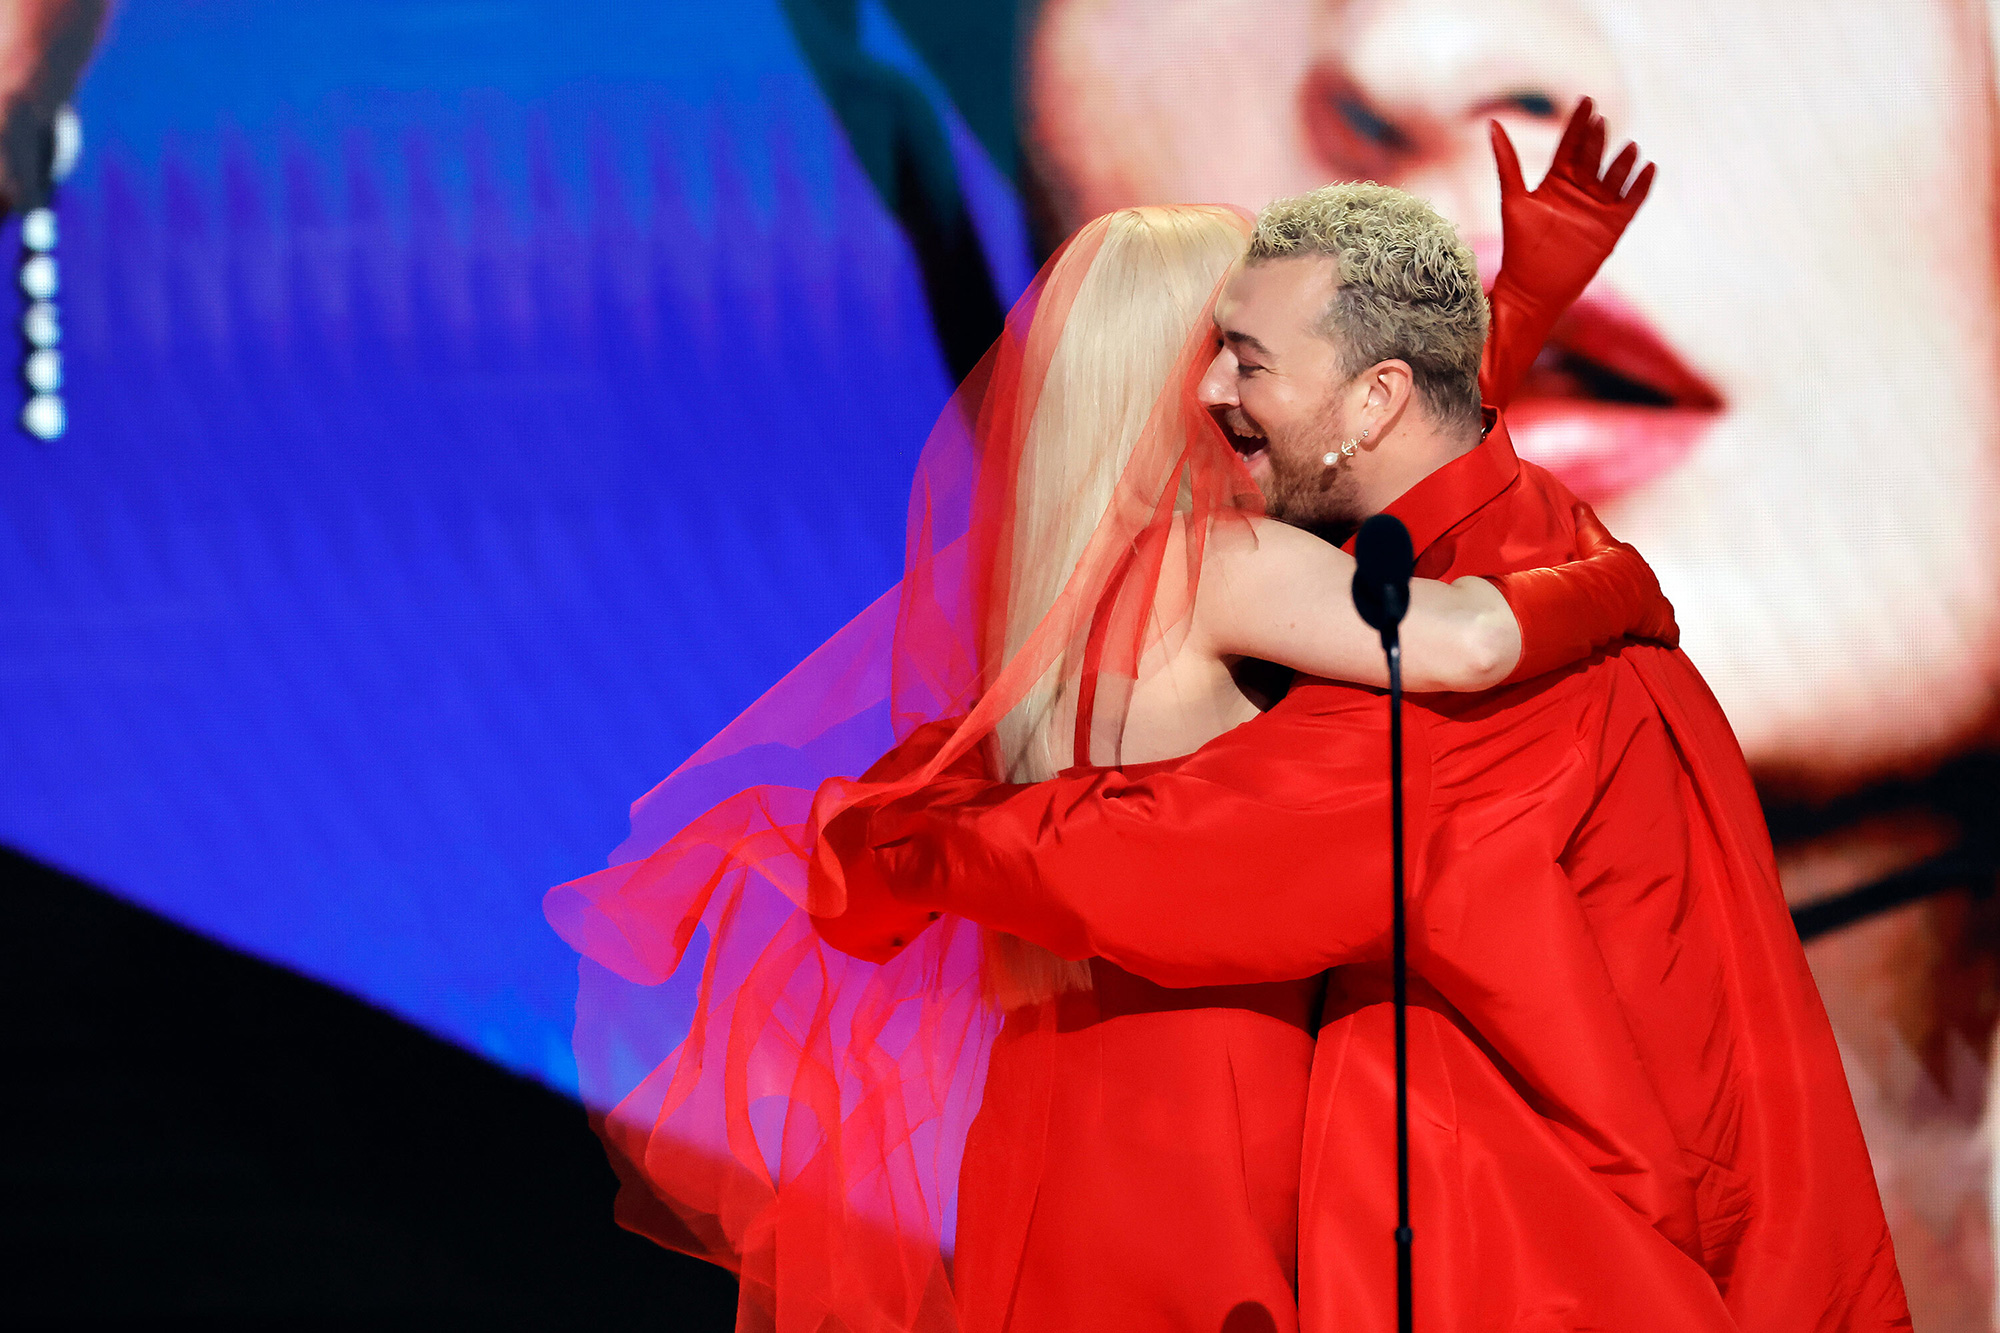 Kim Petras and Sam Smith celebrate after winning the Grammy for best pop duo or group performance ("Unholy"). Petras, who is transgender, gave the acceptance speech on the duo's behalf. She thanked "all the transgender legends before me who kicked these doors open for me."